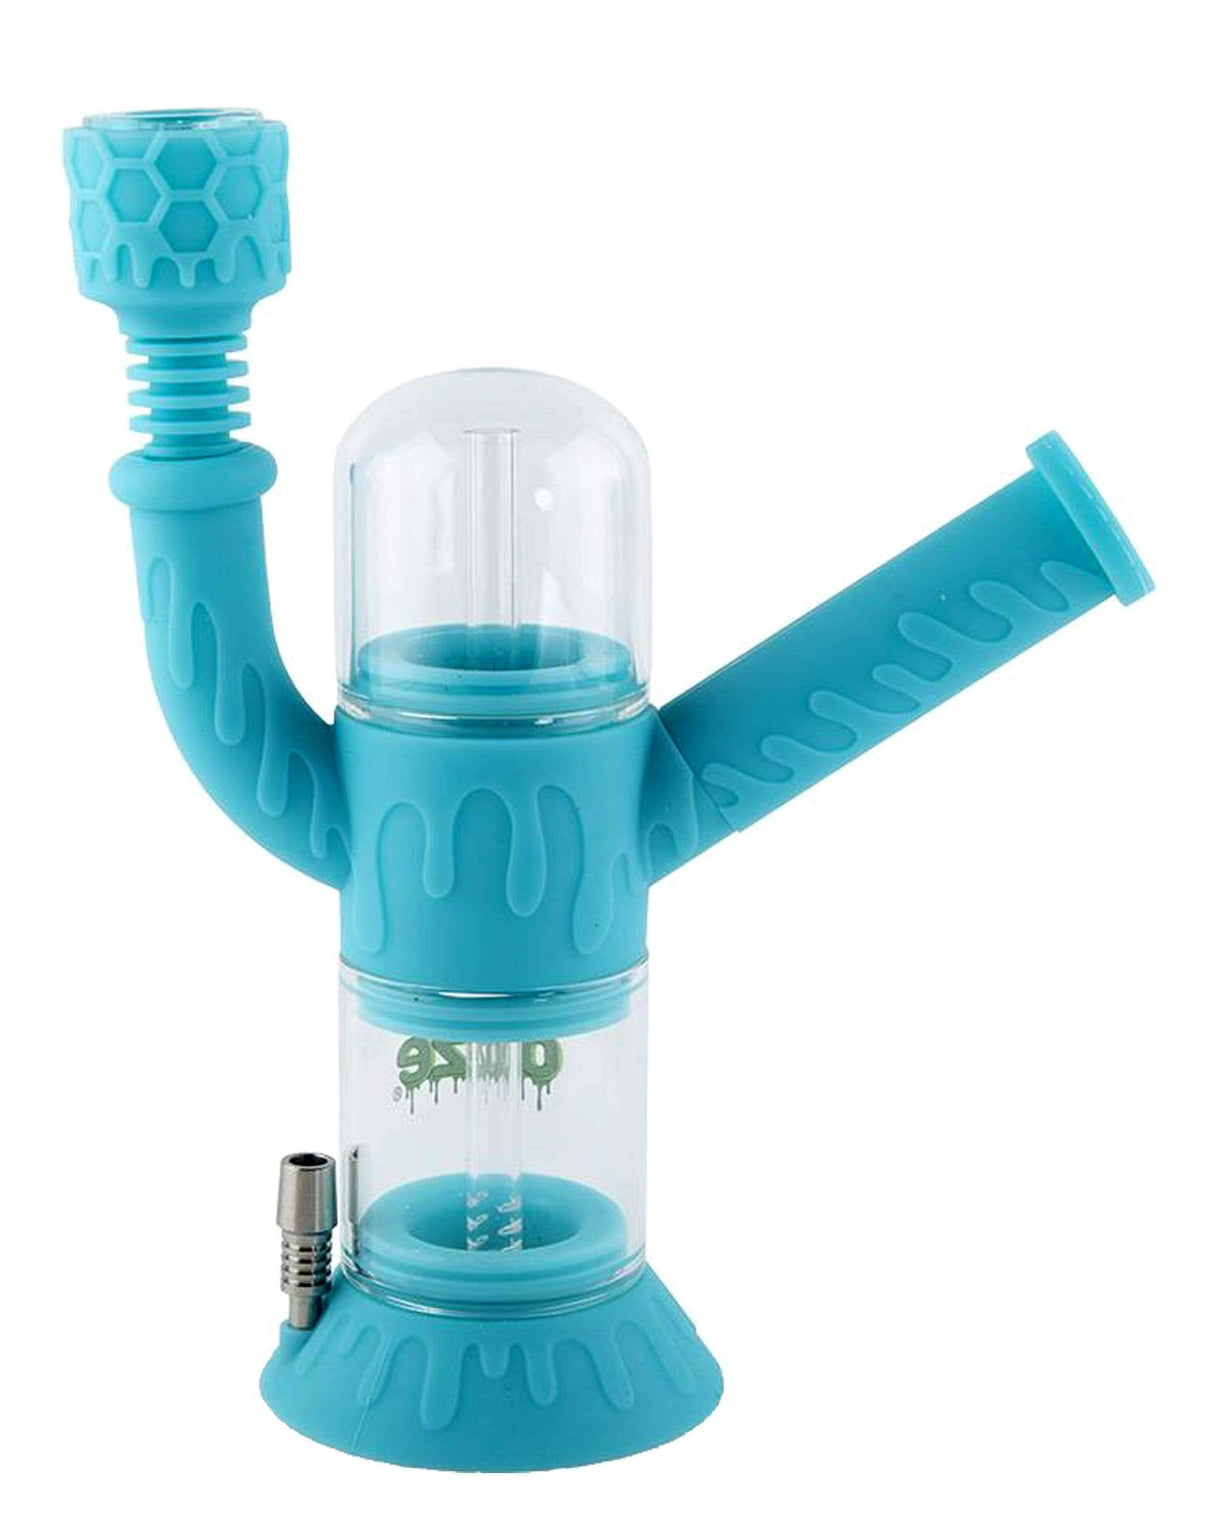 Ooze Cranium Bong & Dab Rig in Teal, 8" Hybrid Silicone Glass with Percolator, Front View